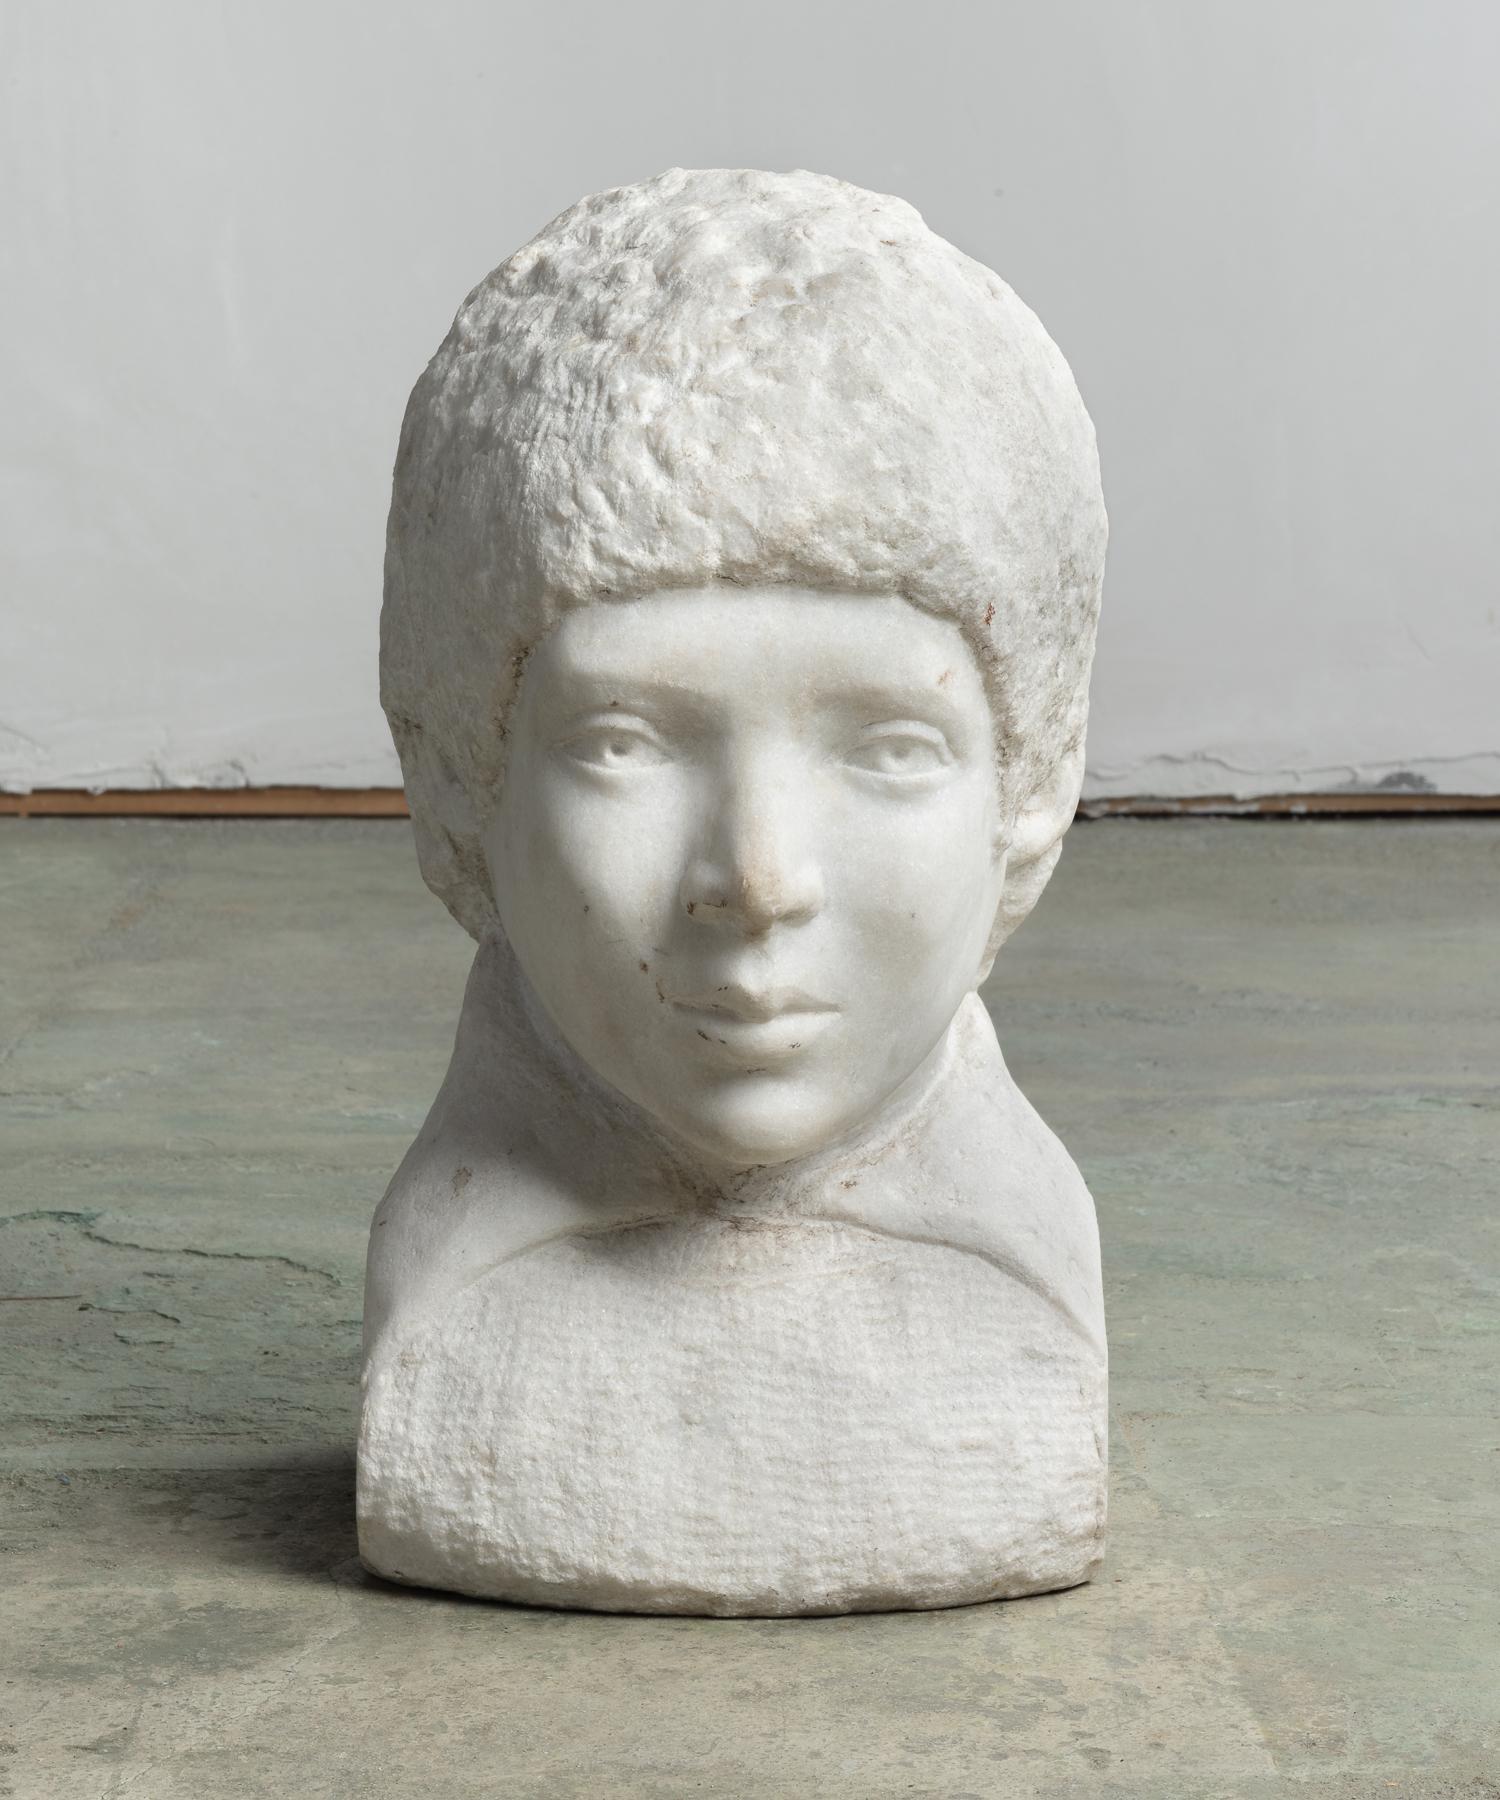 Marble bust, circa 19th century

Representation of a boy with a finely finished face and other roughly carved, un-finished elements.

This piece ships from Providence, Rhode Island.